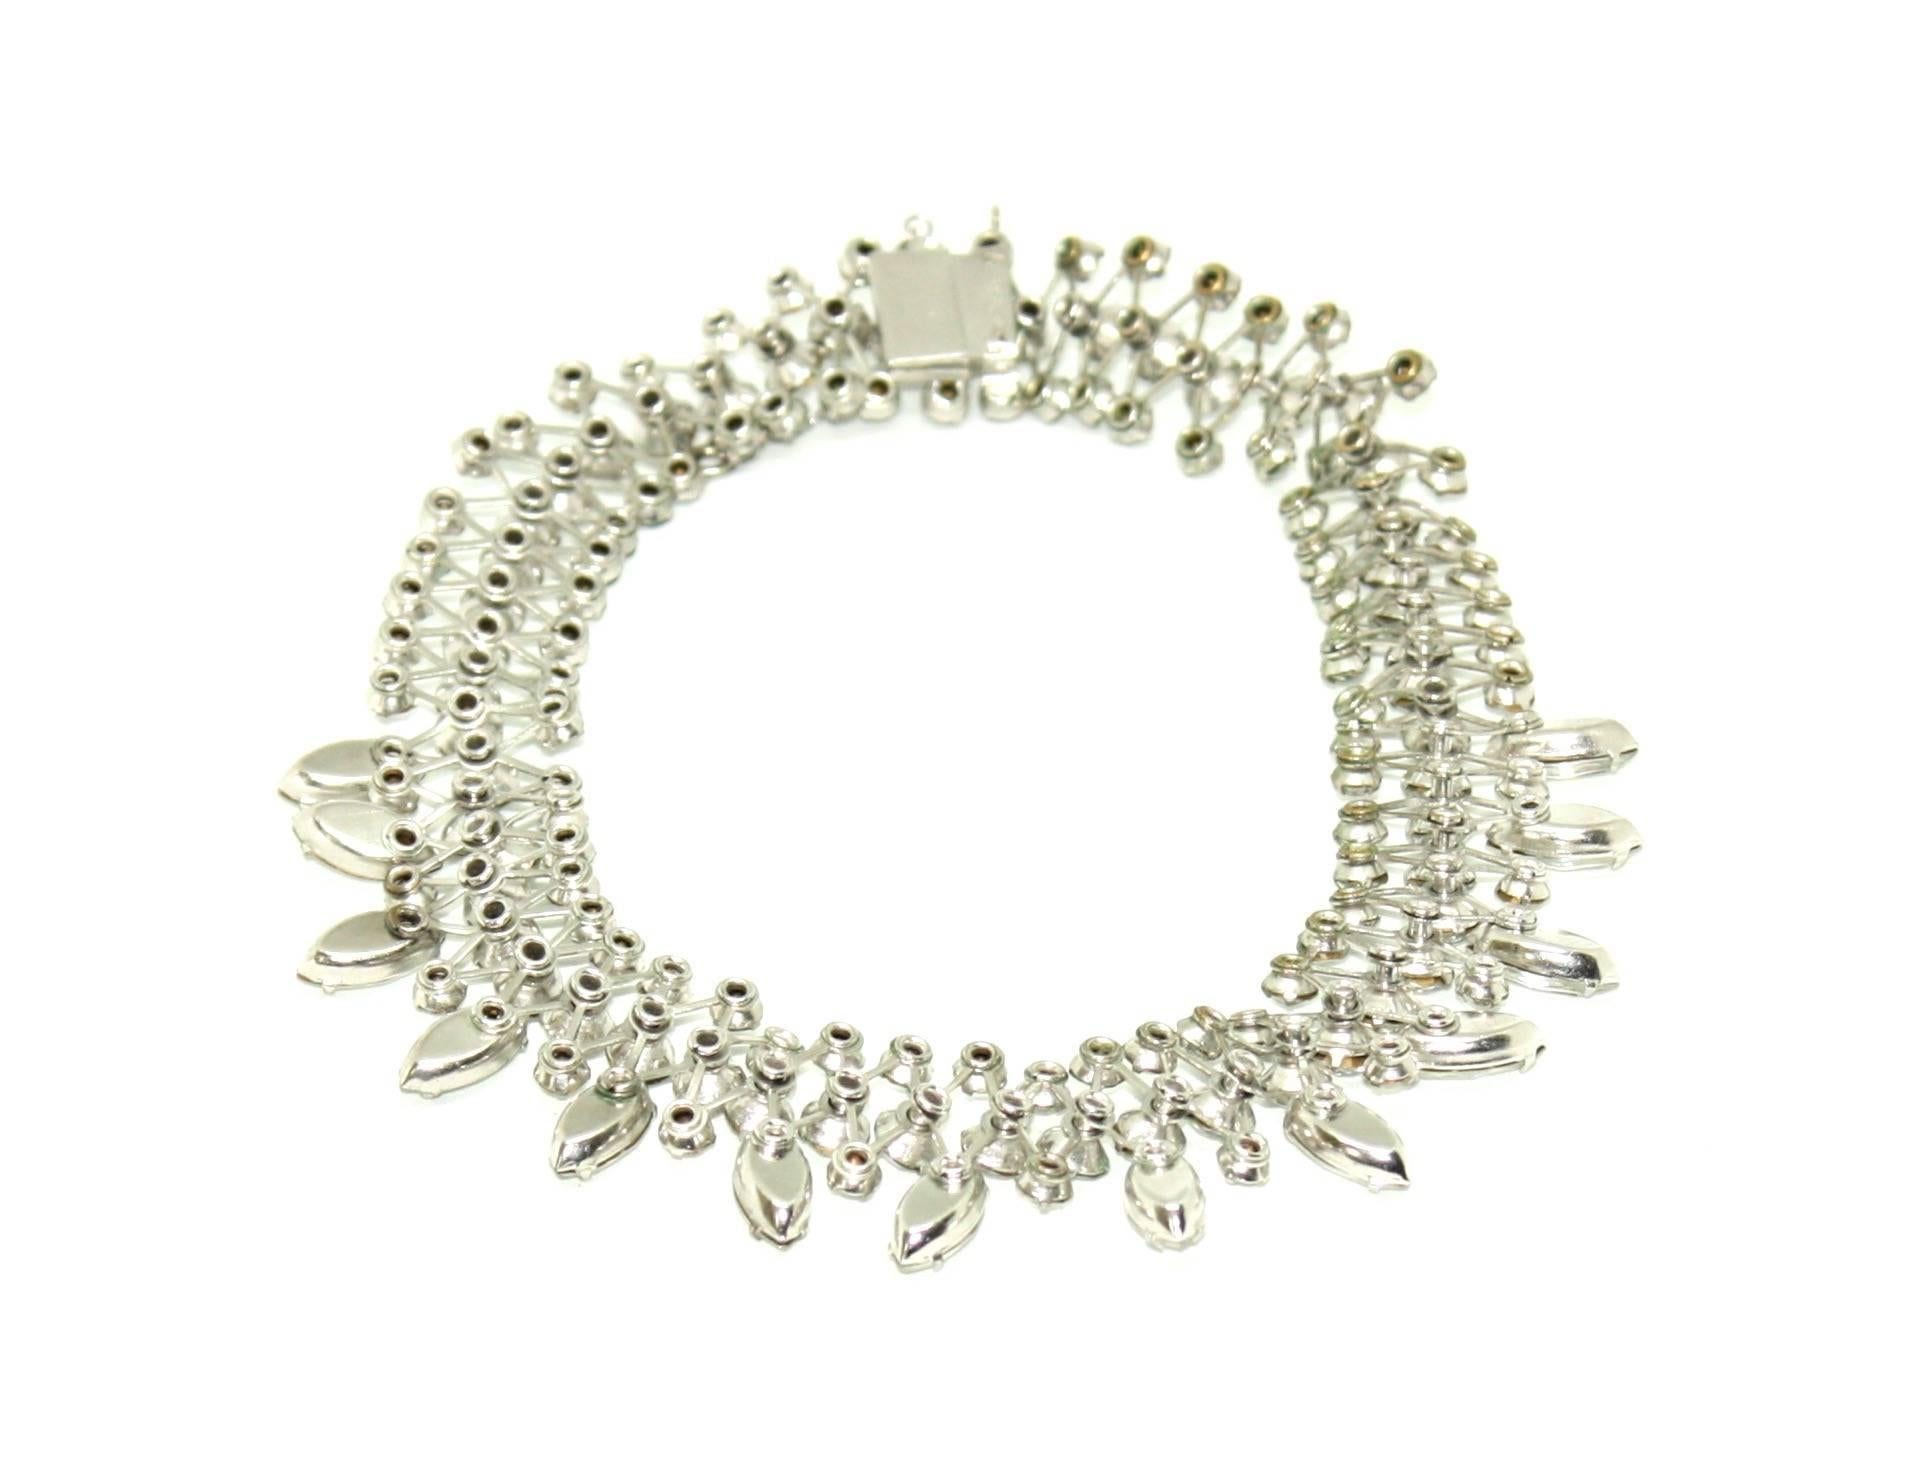 Absolutely stunning necklace featuring a variety of claw-set clear crystals on silver tone metal by Eisenberg. The box tongue clasp has the name Eisenberg written in script on the reverse and this mark can be dated to around the mid 1940's. The